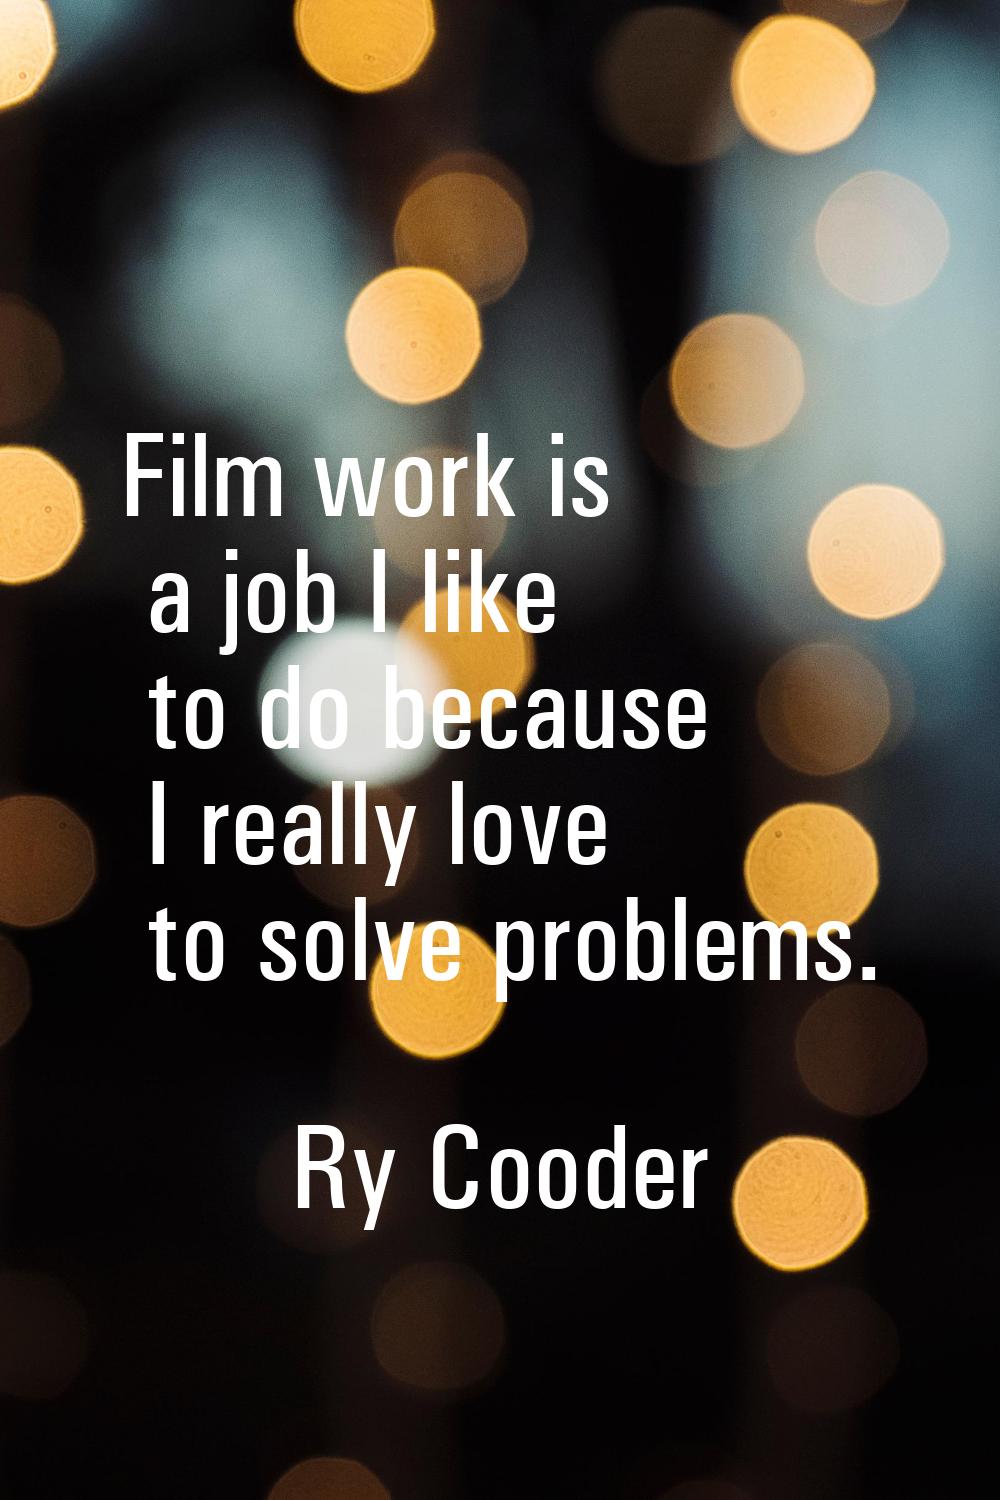 Film work is a job I like to do because I really love to solve problems.